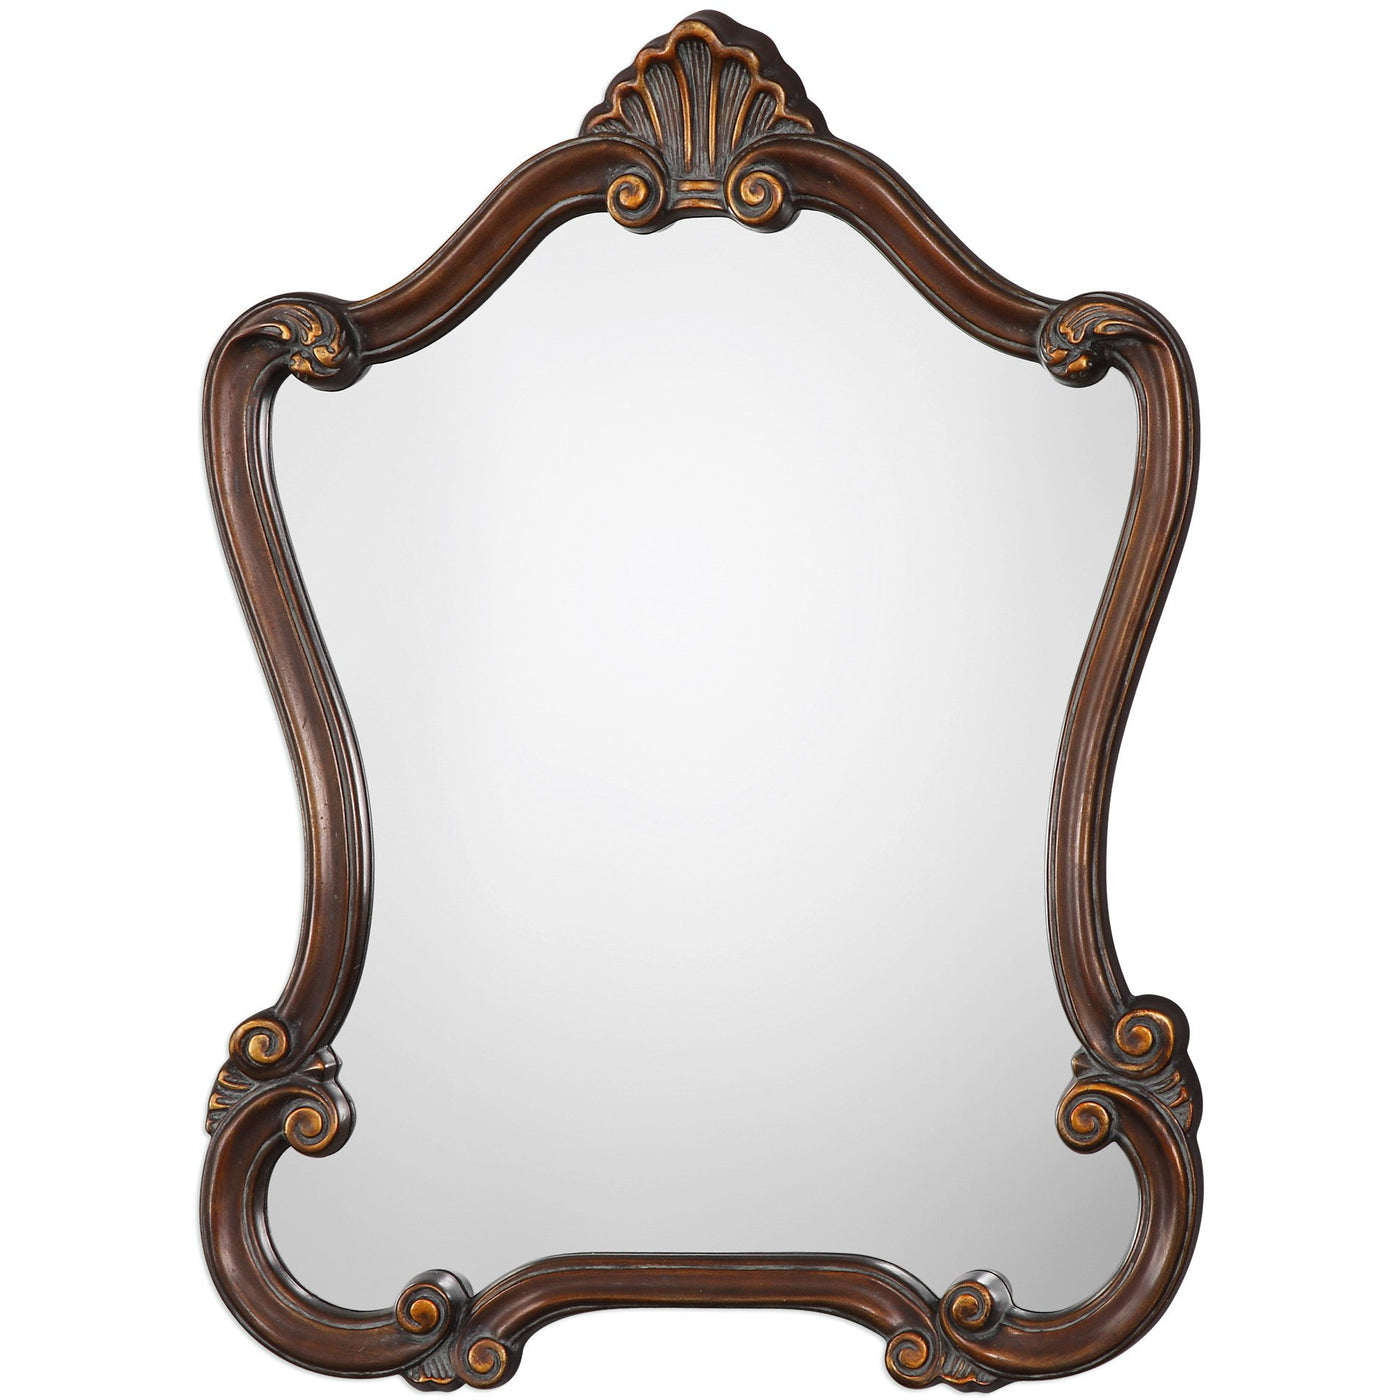 The Windsor - Arched Decorative Wall Mirror - Glass.com